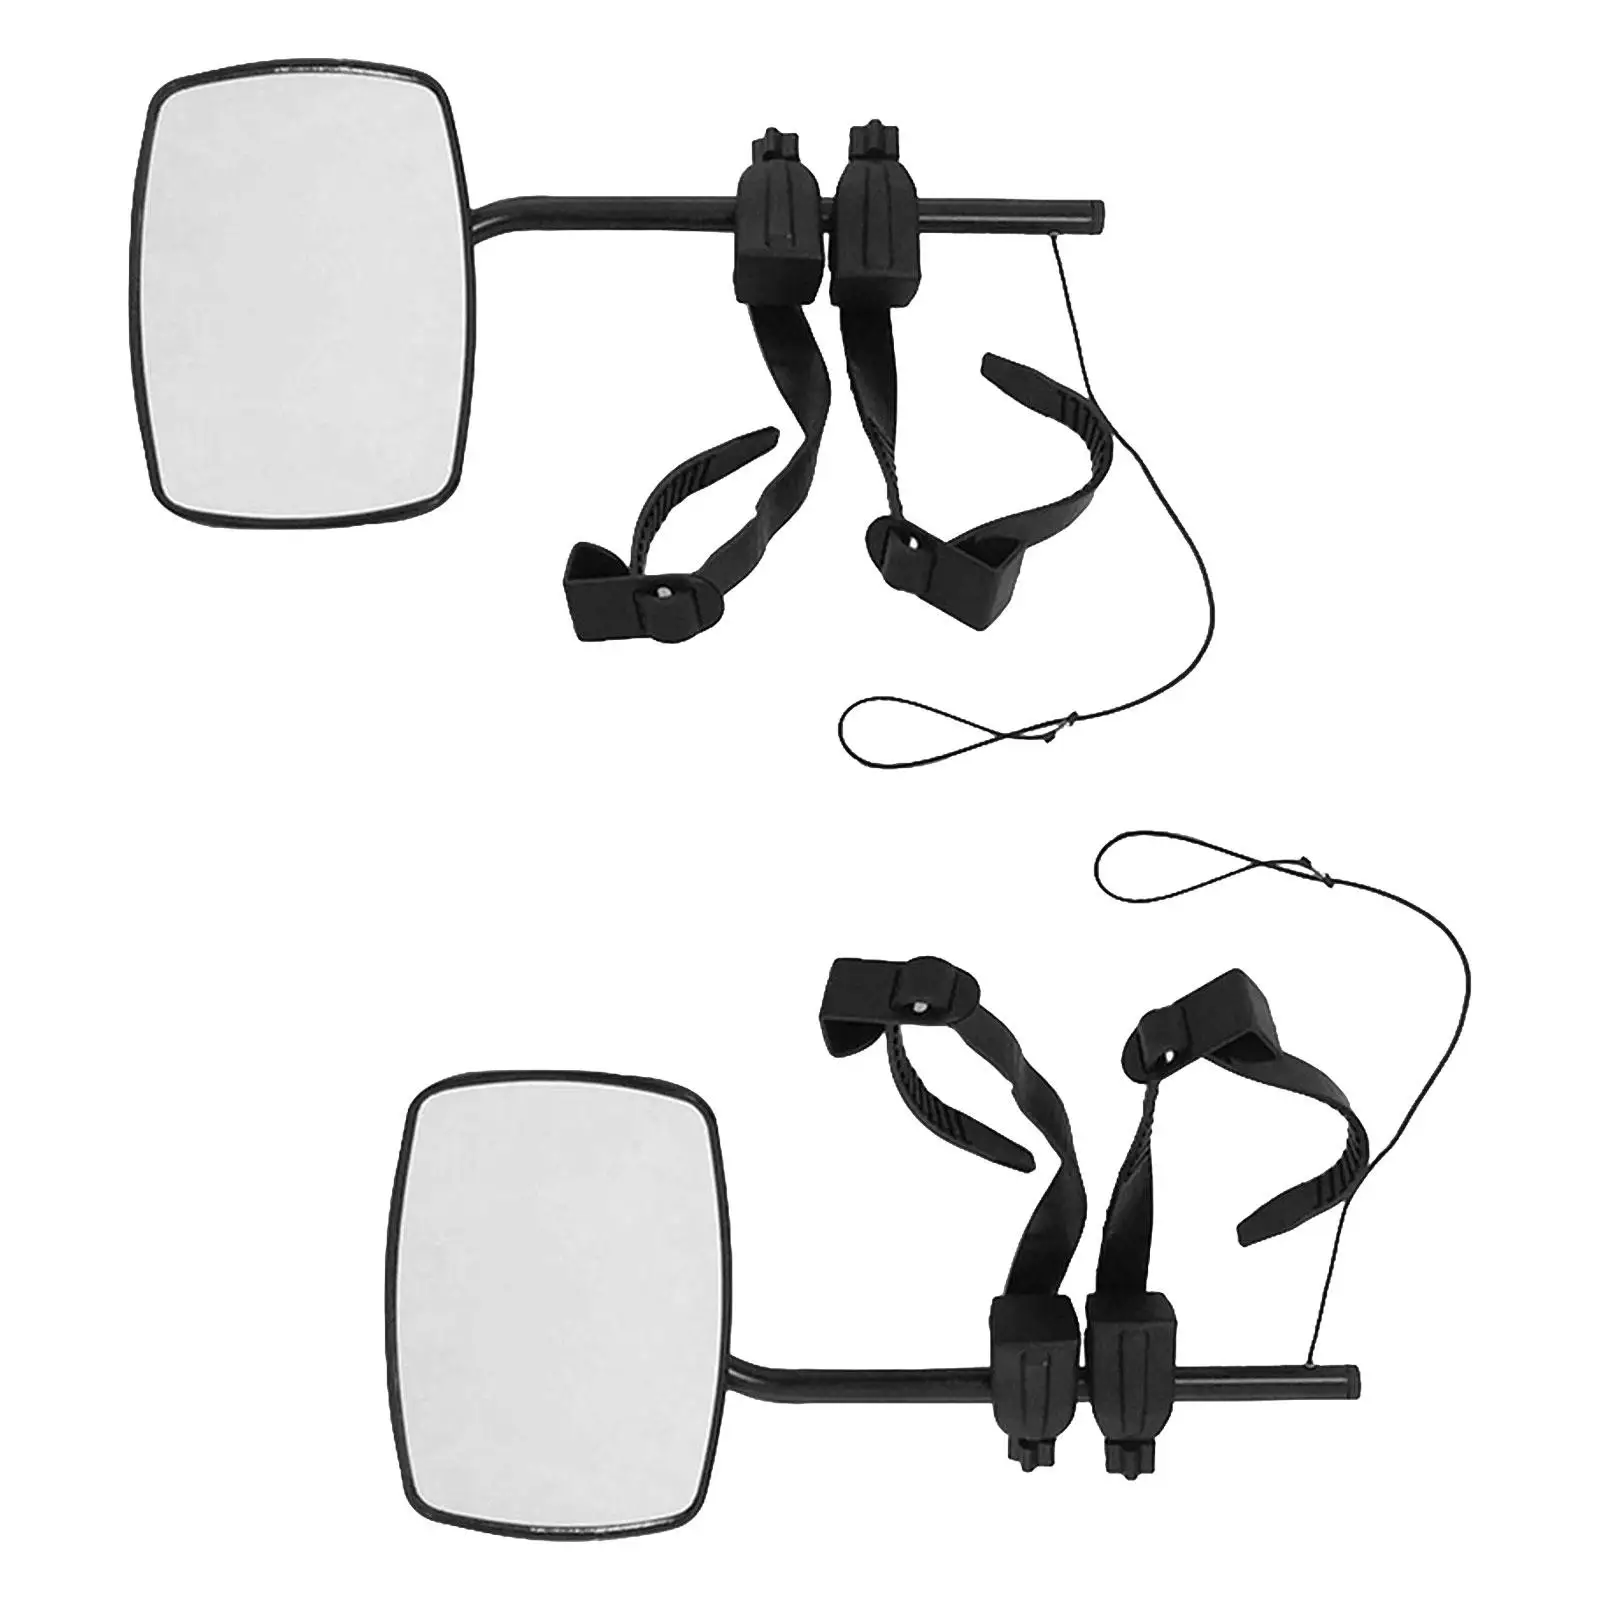 2 Pieces Clip on Towing Mirror Extensions Clamp on Tow Mirror for Truck